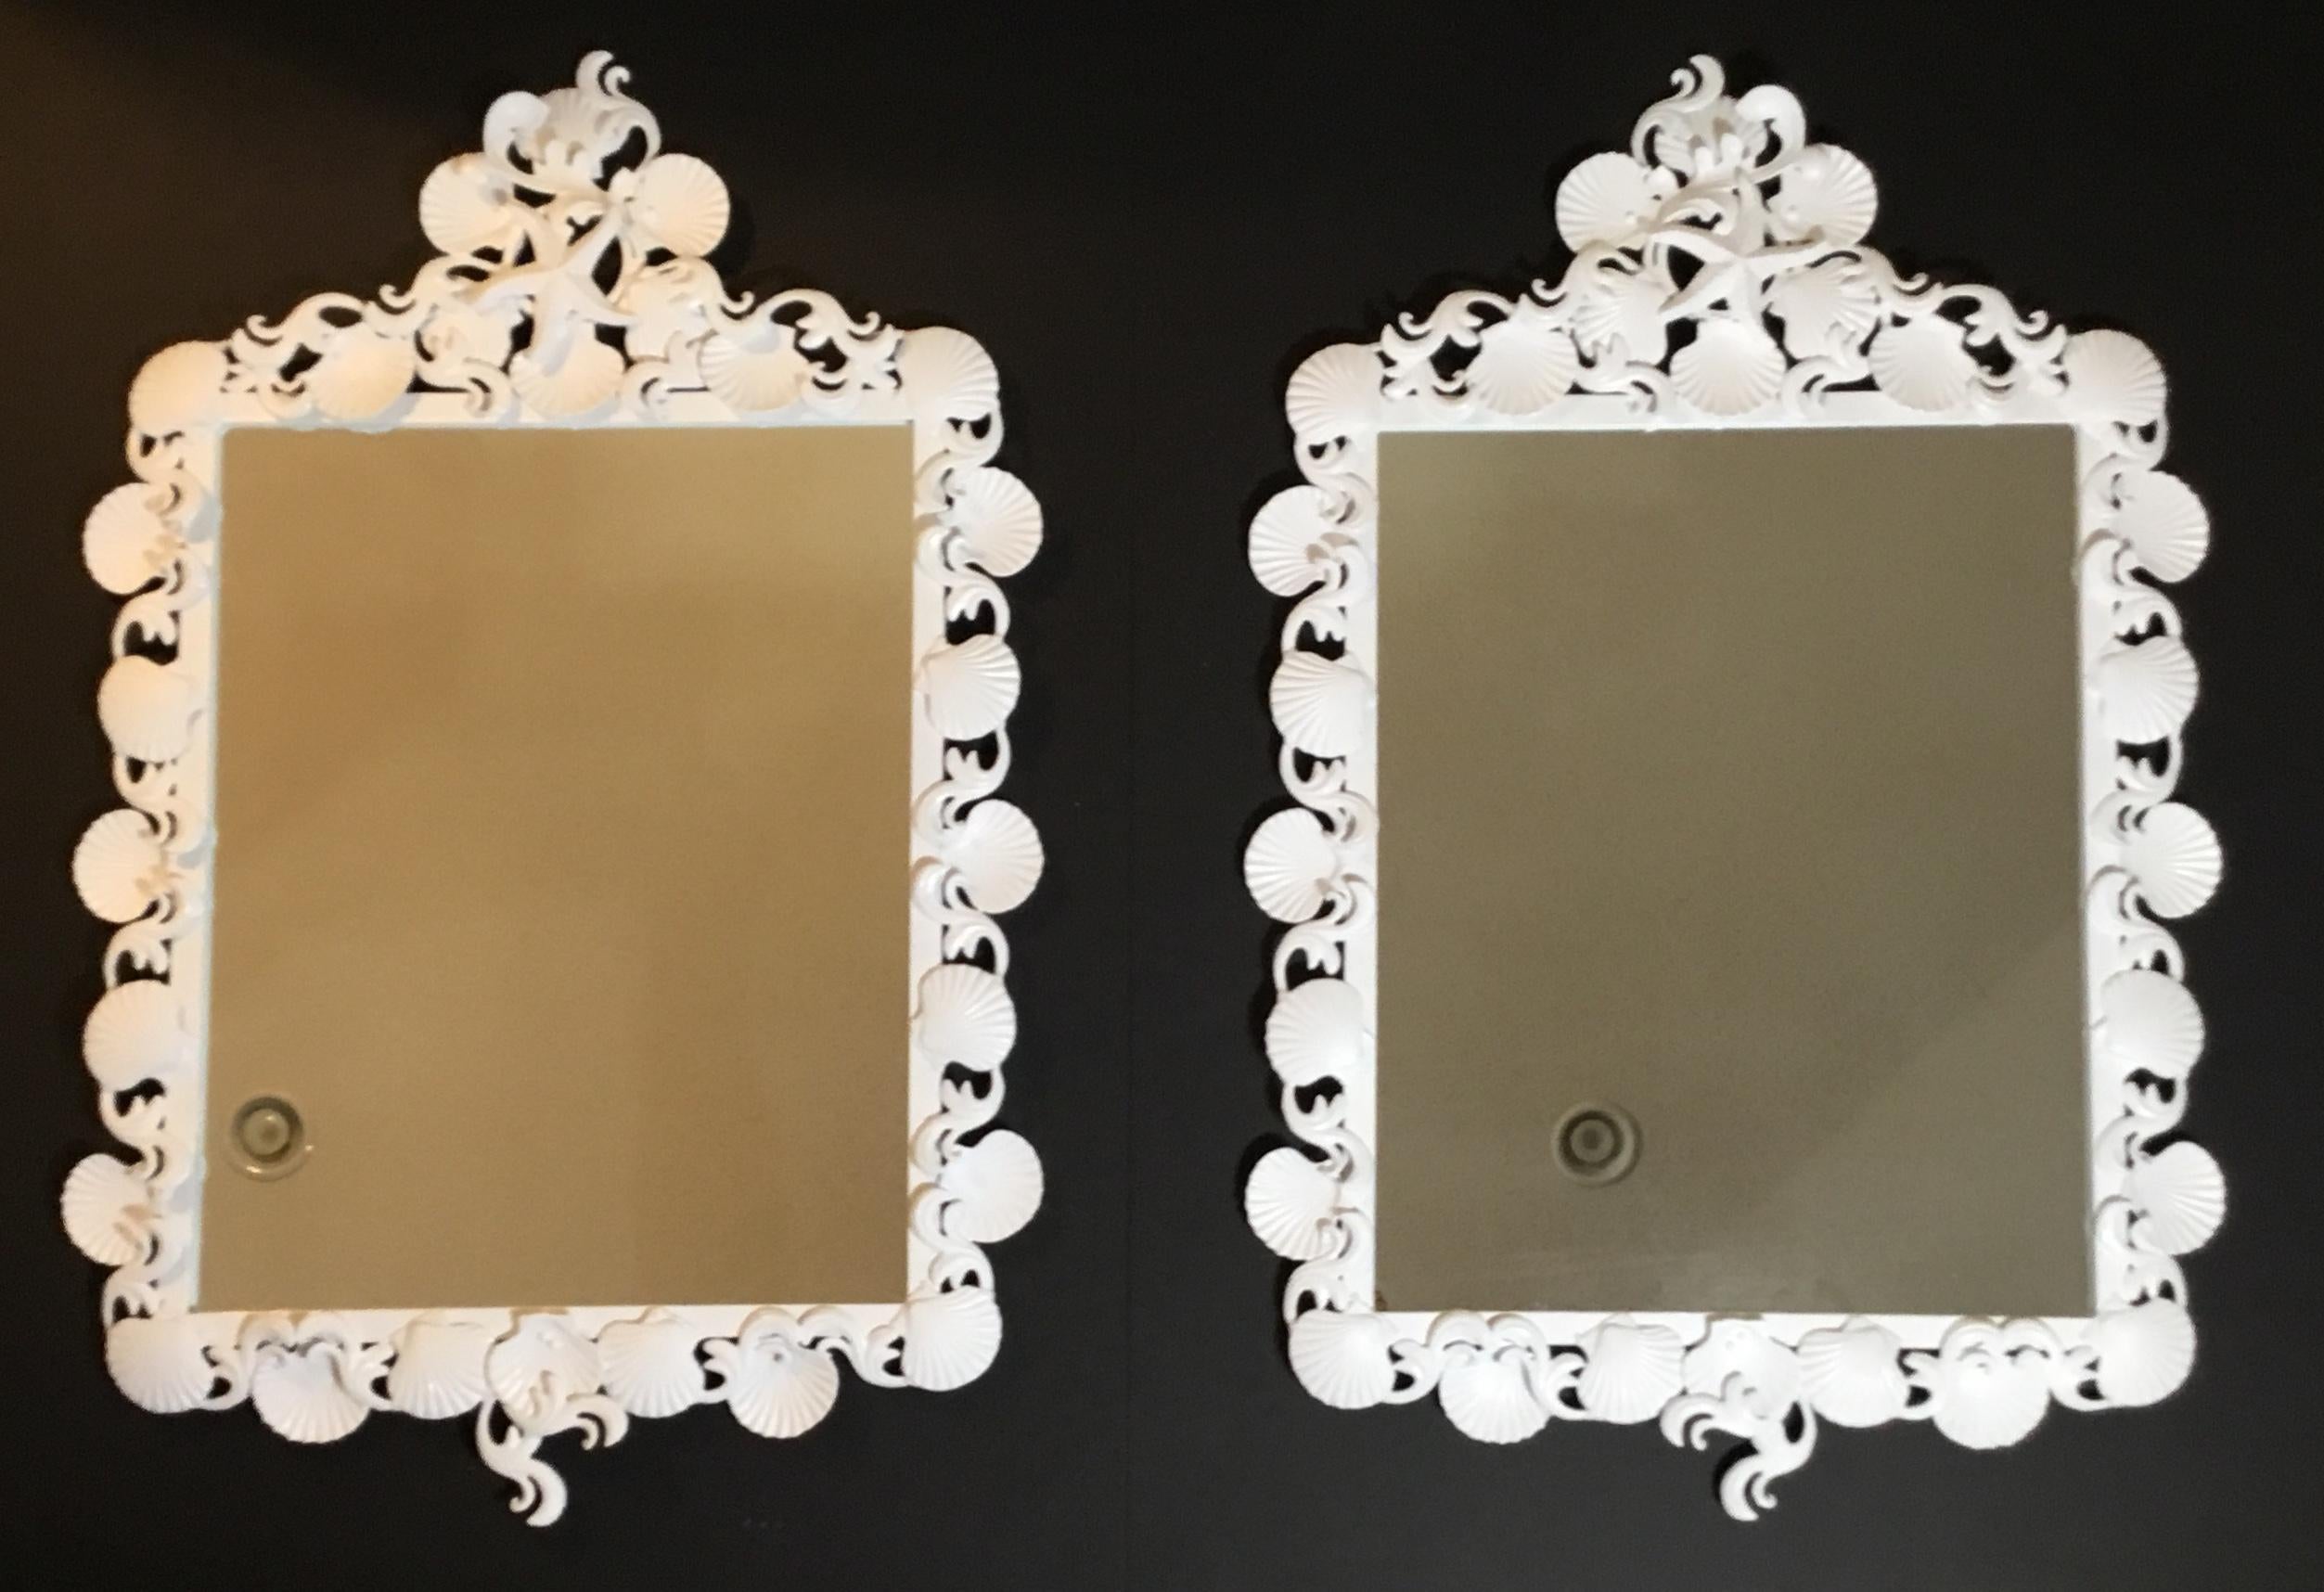 Fantastic pair of mirrors made of iron artistically decorated with sea shell and sea star motifs, painted in white lacquer.
Will sell single mirror upon request.
Actual mirror size: 28” x 22”.5.